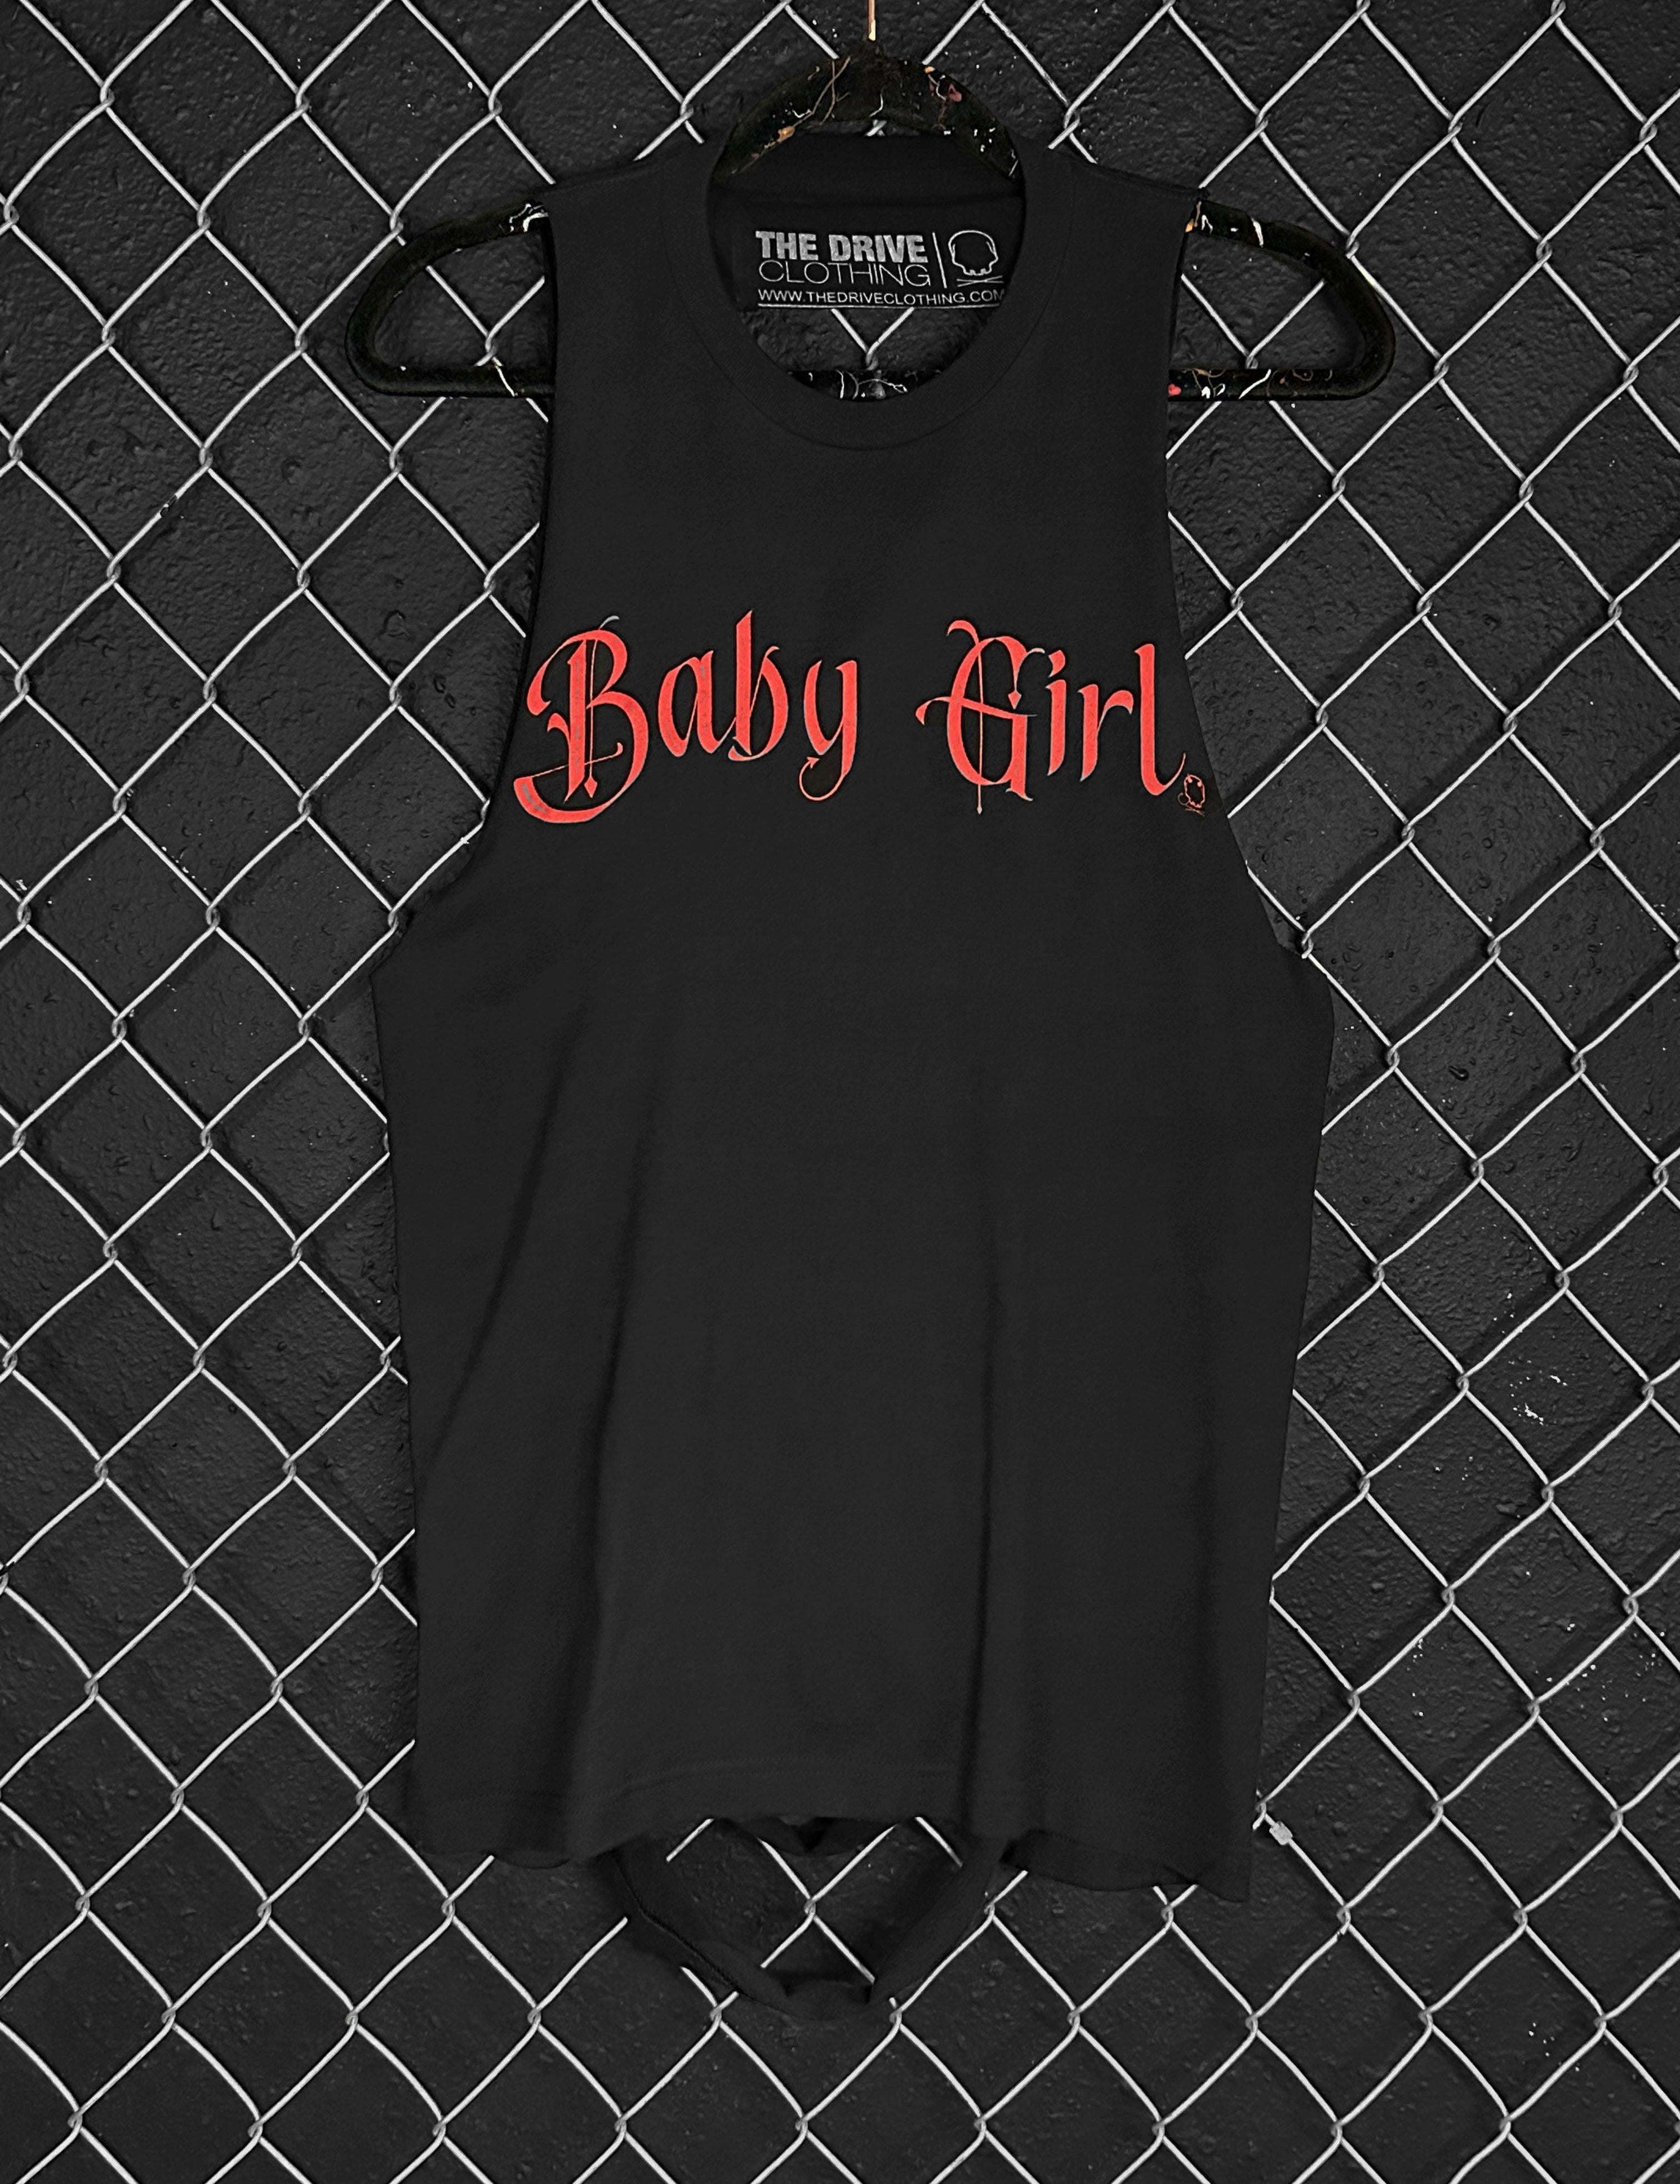 BABY TANK TOP - The Drive Clothing